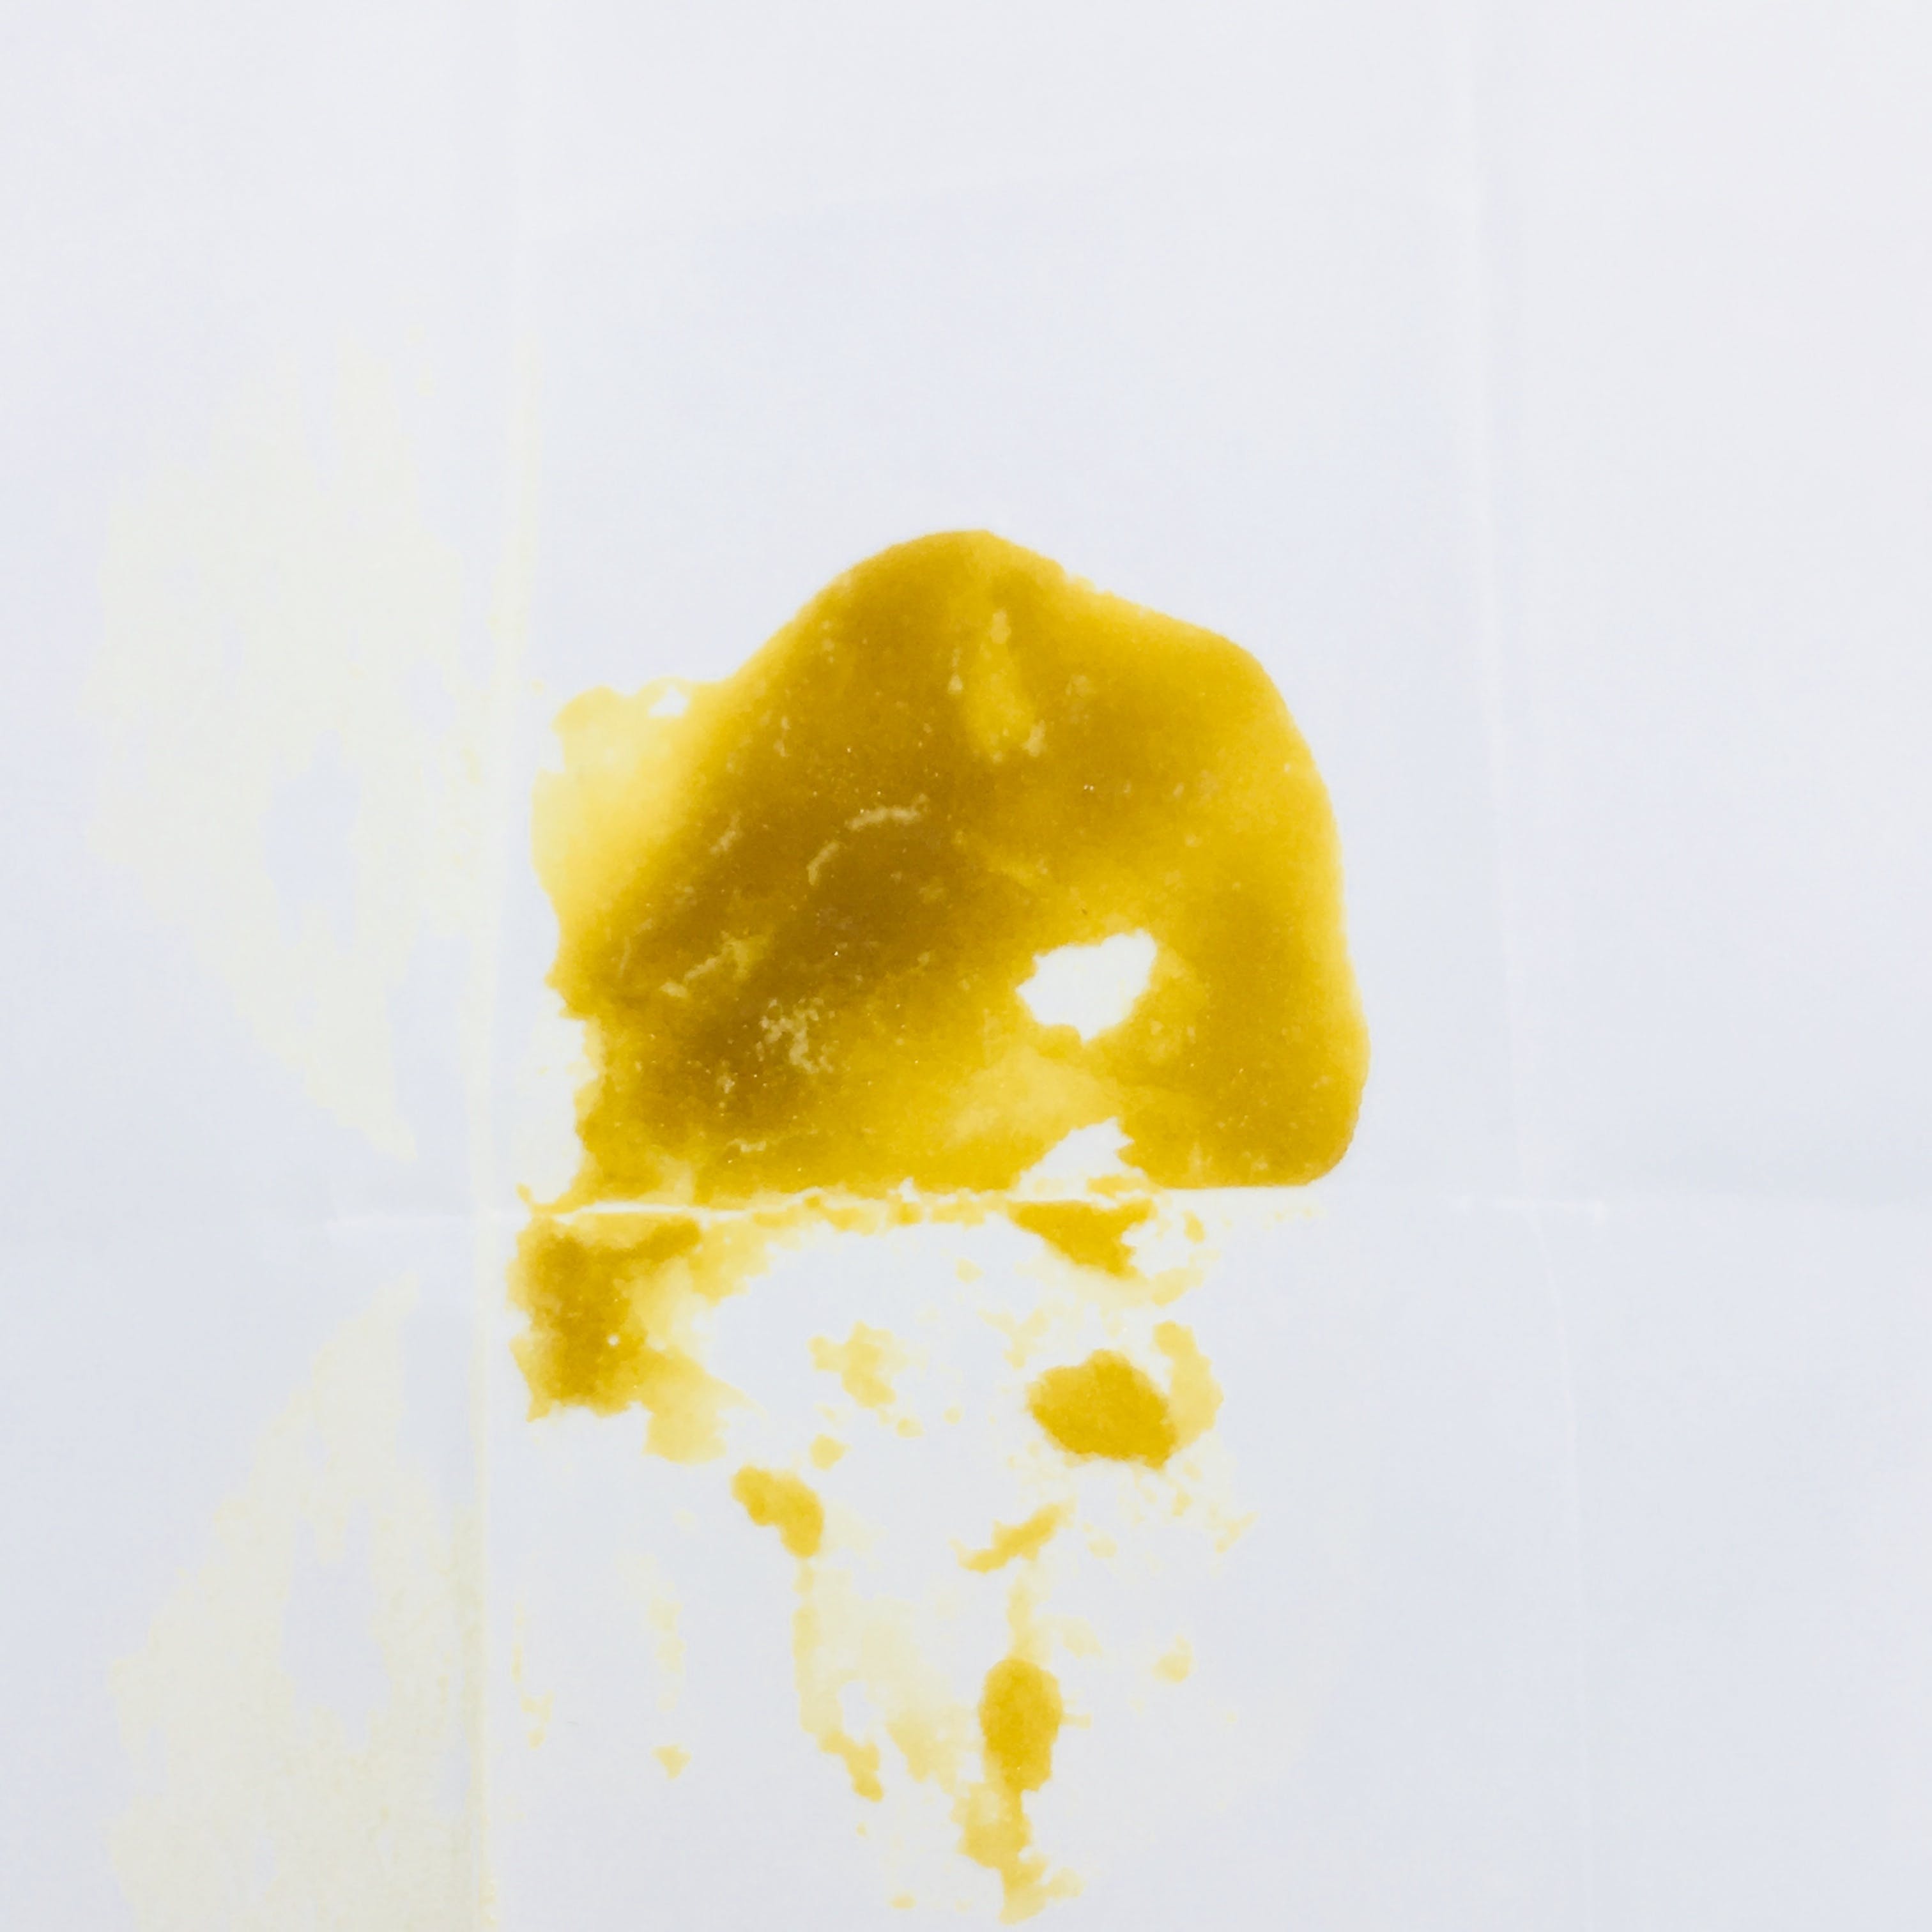 wax-travelling-high-concentrates-sin-mint-cookies